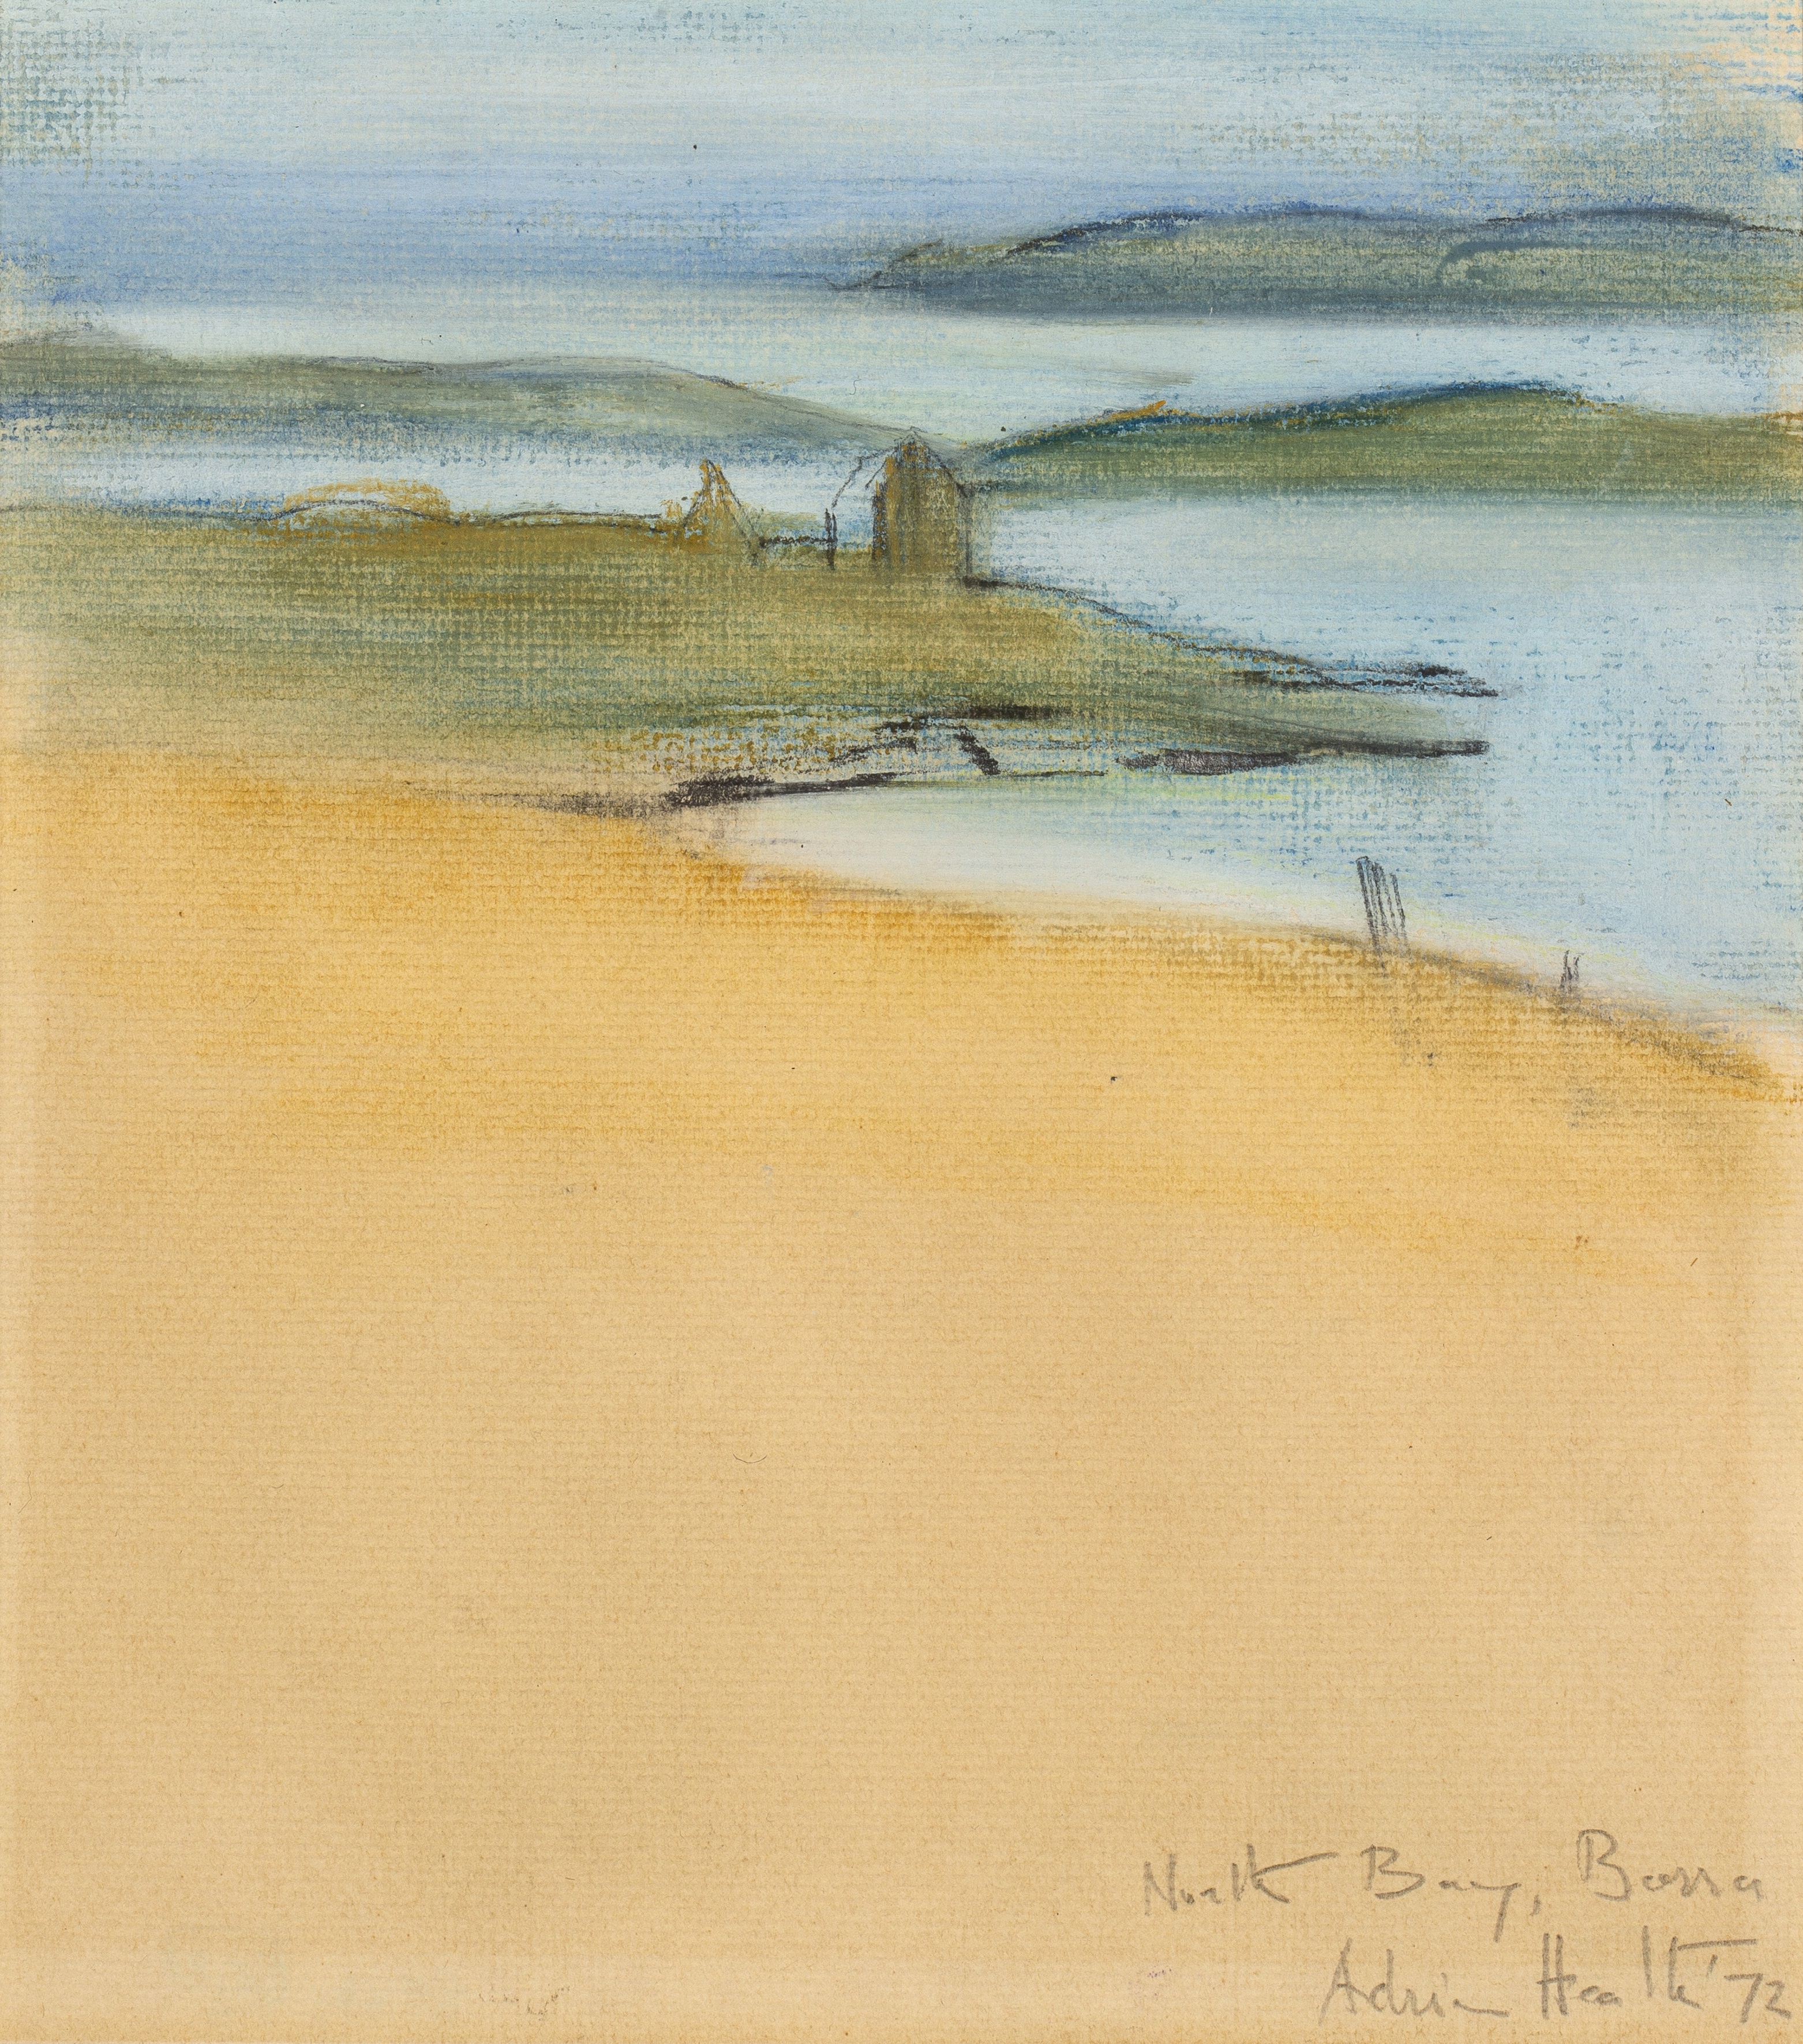 Adrian Heath (1920-1992) North Bay, Barra, 1972 signed, dated, and titled in pencil (lower right)